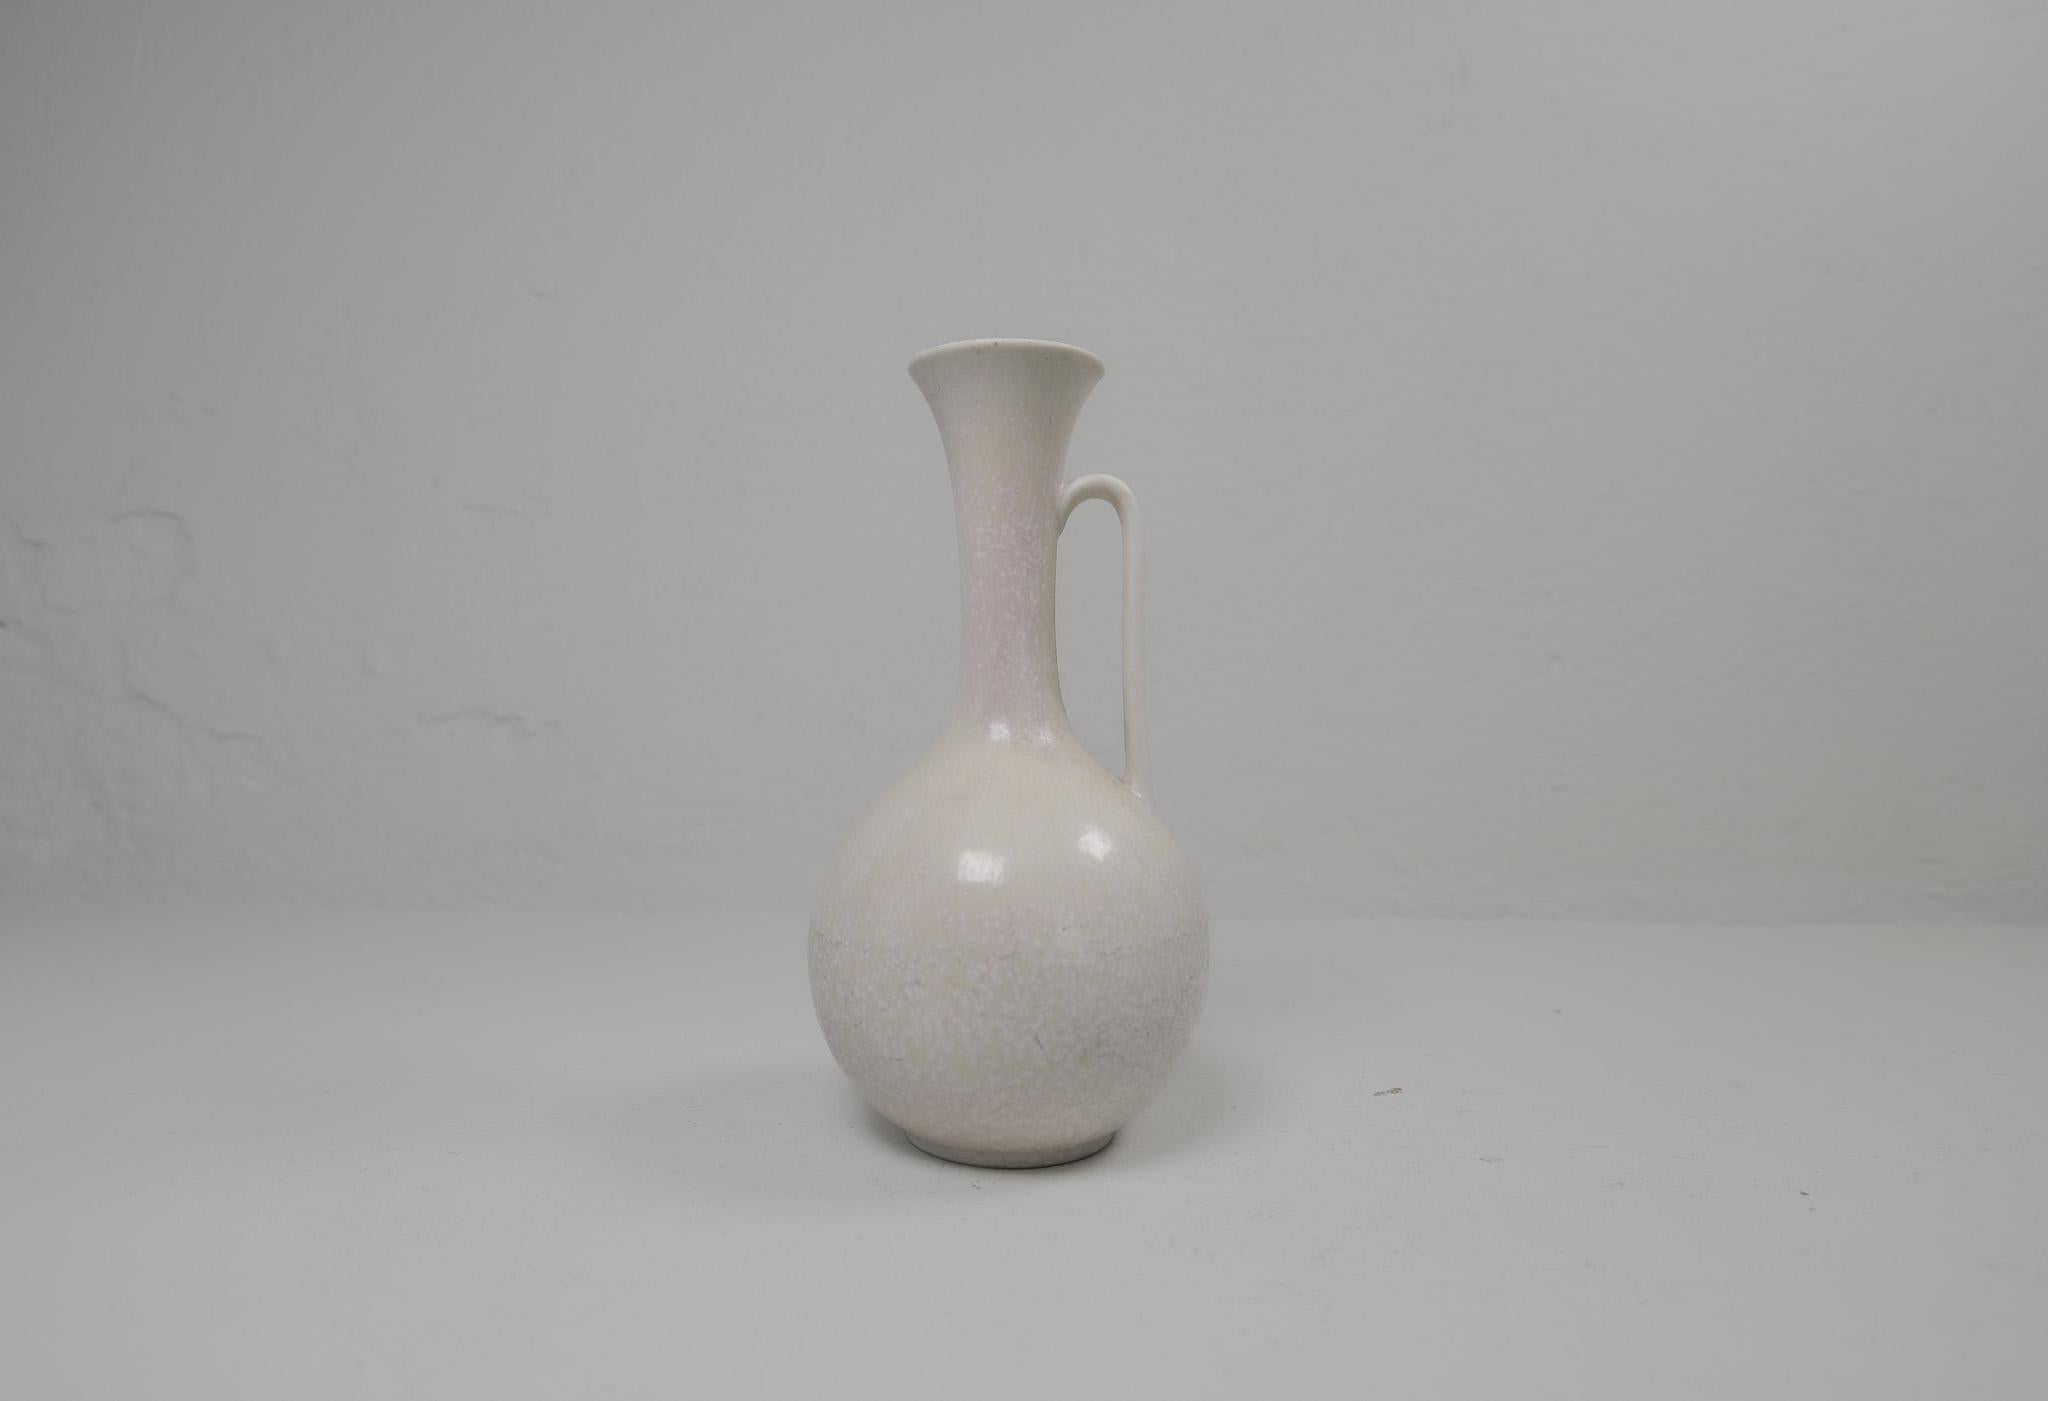 This large, unusual stoneware vase by Gunnar Nylund for Rörstrand, 1950s is gifted with light grey and white hare fur glaze with stains of pink. And it has that stunning look of Nylunds great craftsmanship. It really gives a great impression. 

Good